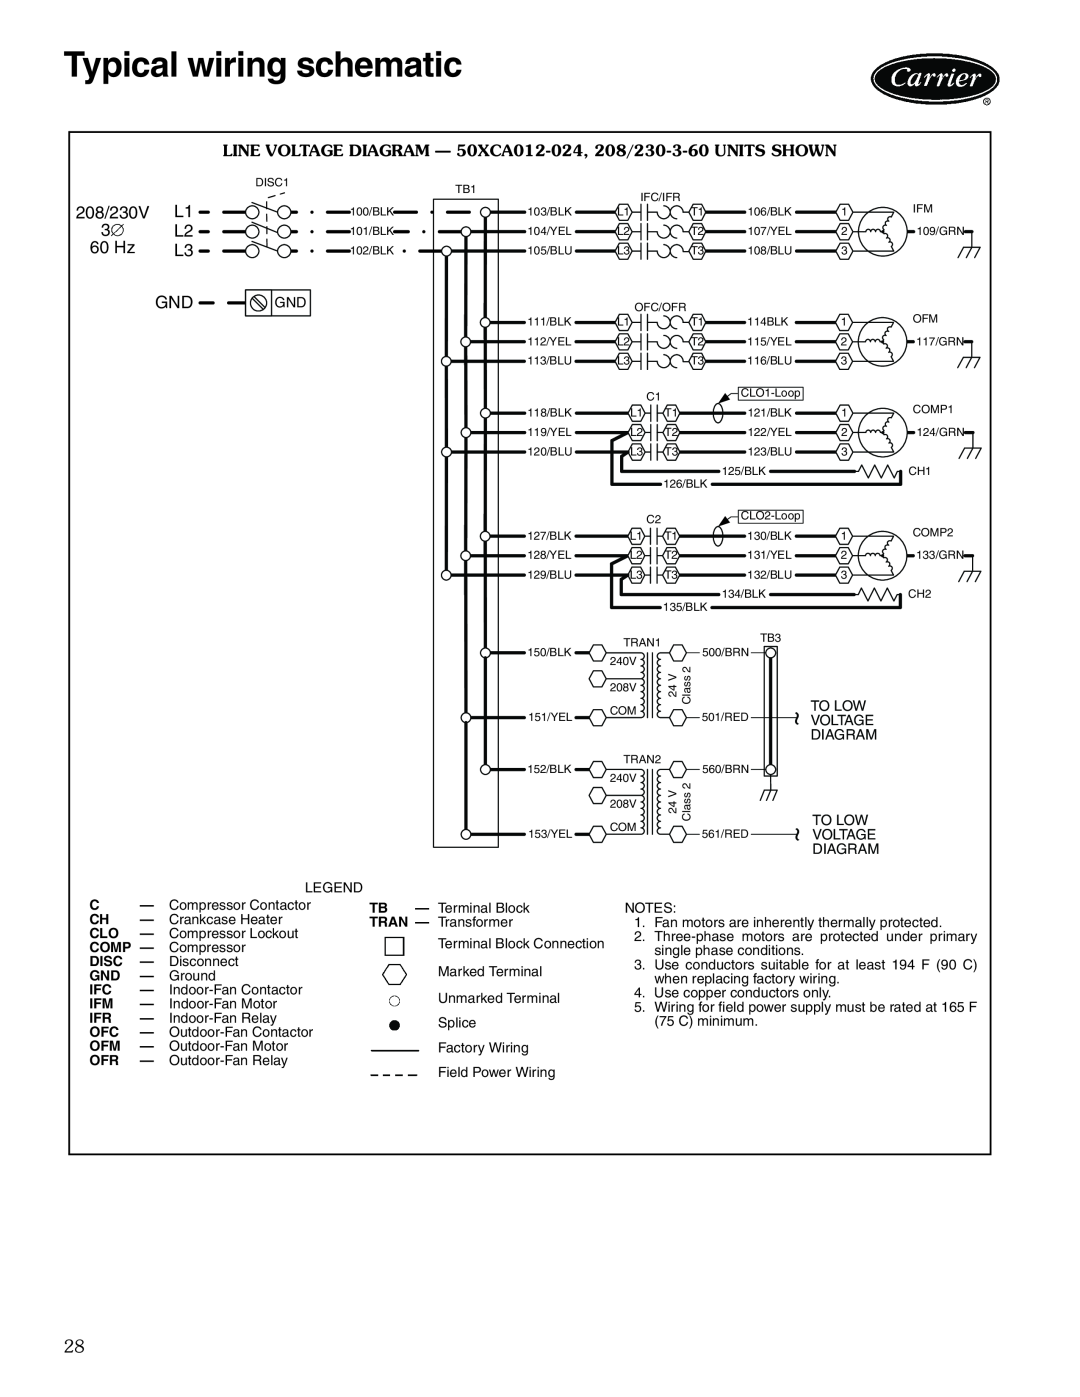 Carrier 50XCA06-24 manual Typical wiring schematic, a50-8504 